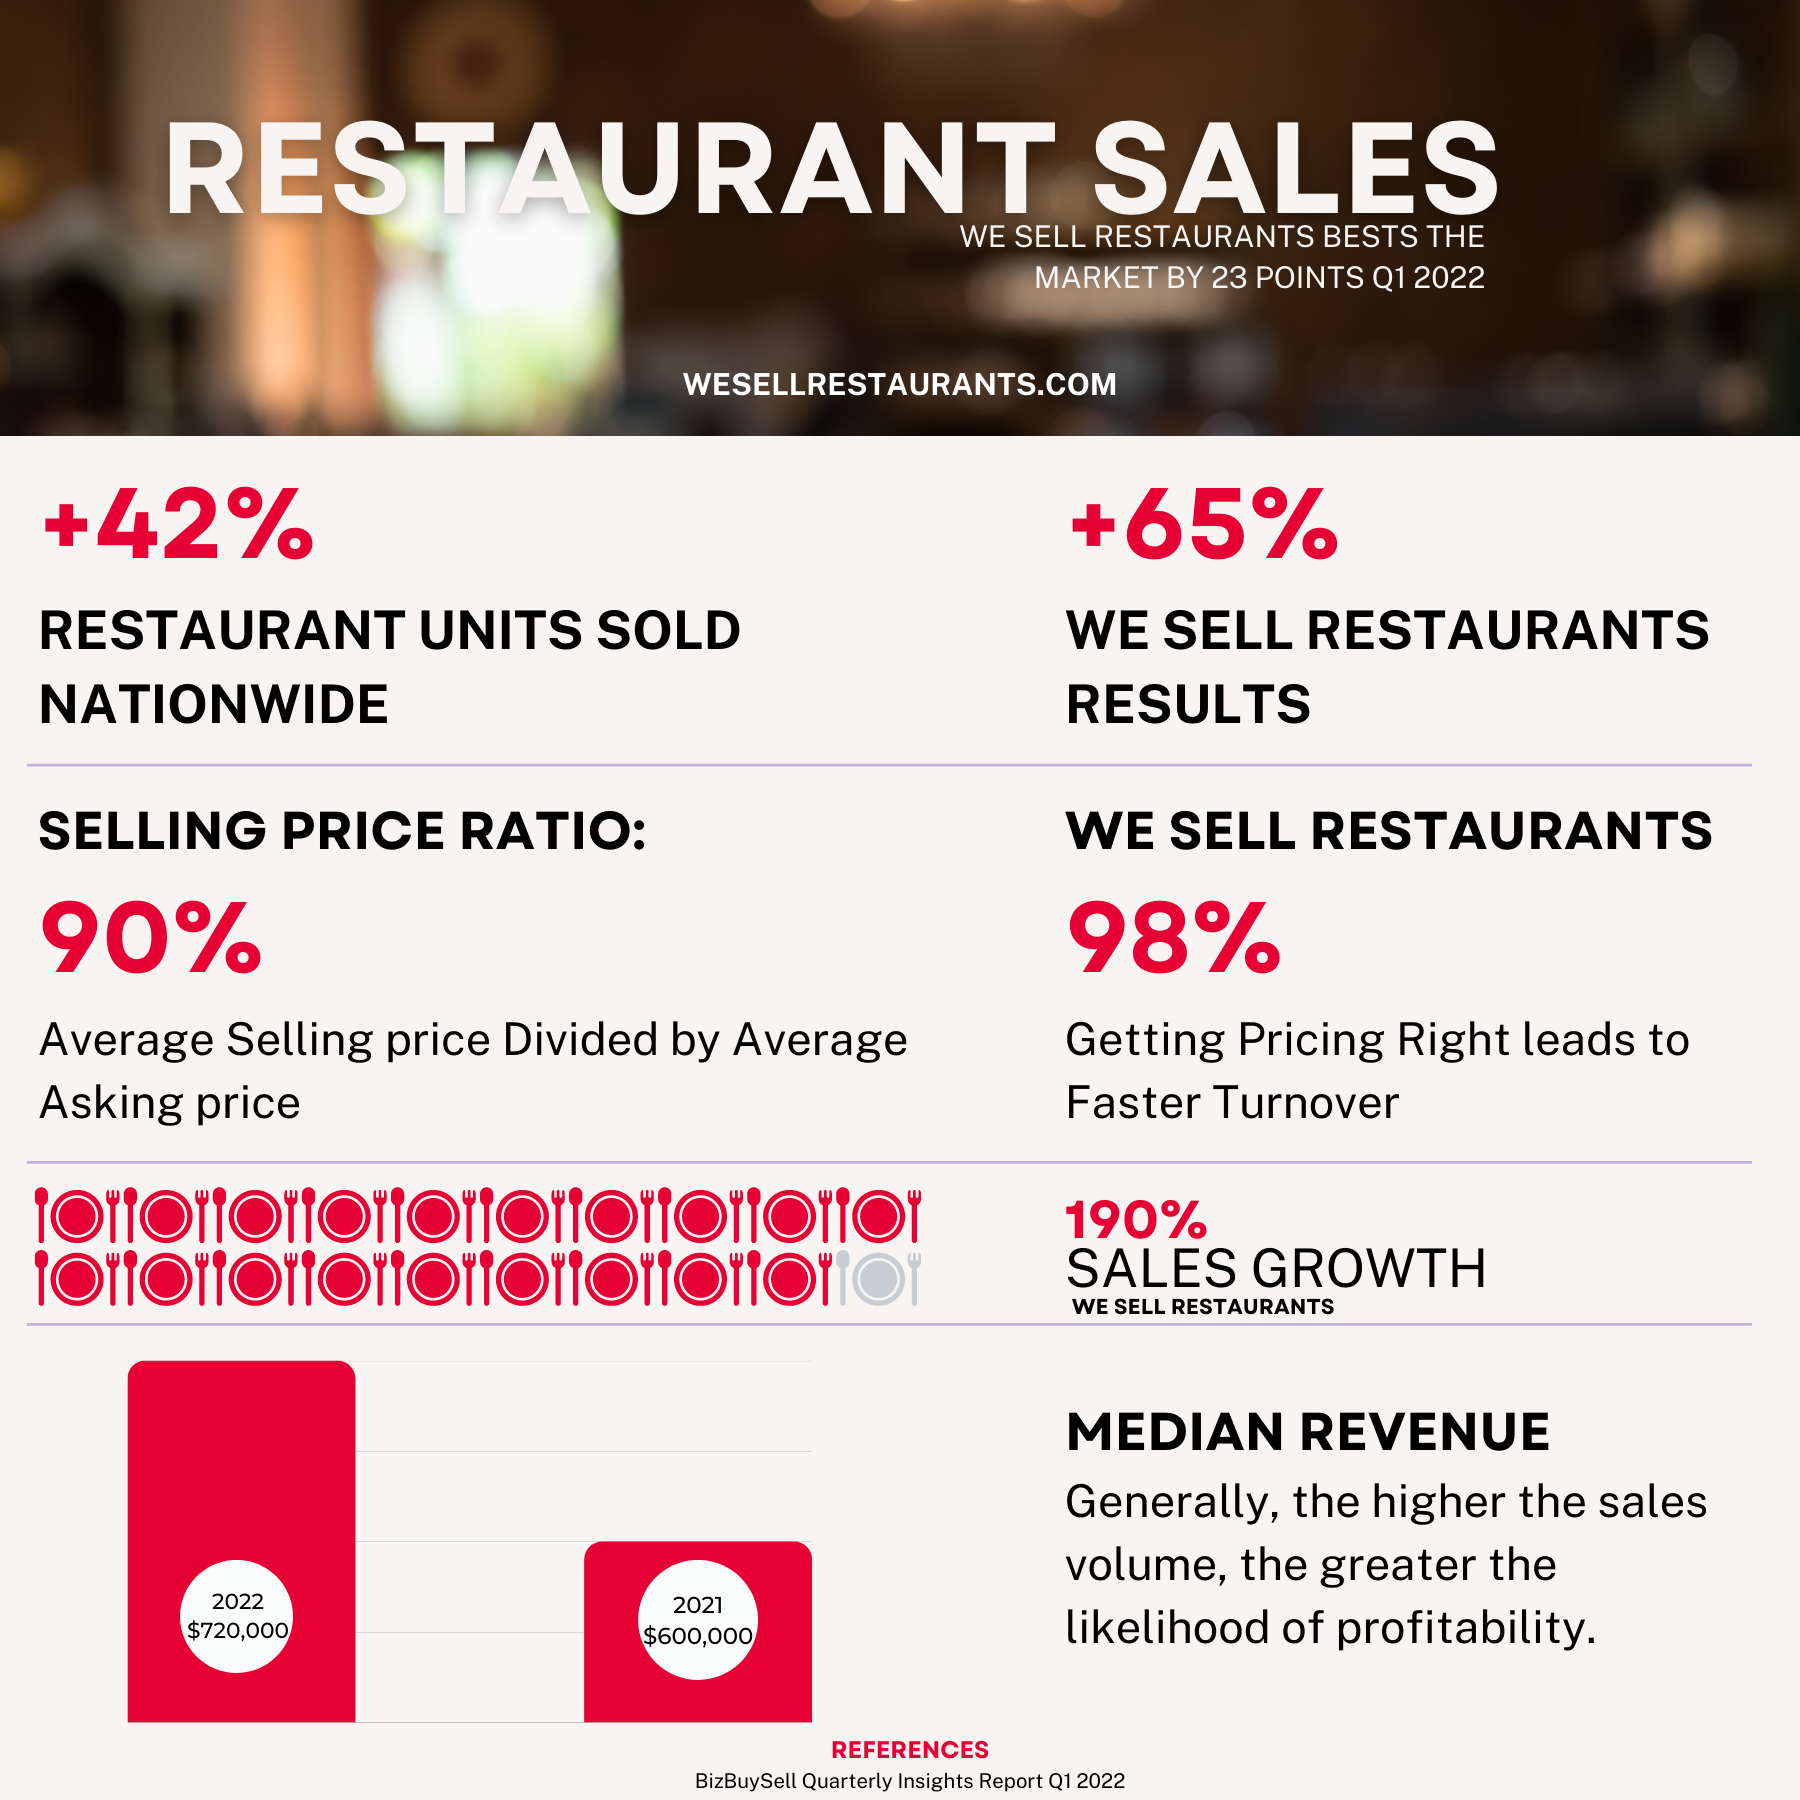 We Sell Restaurants Bests the Market by 23 points in Selling Restaurants